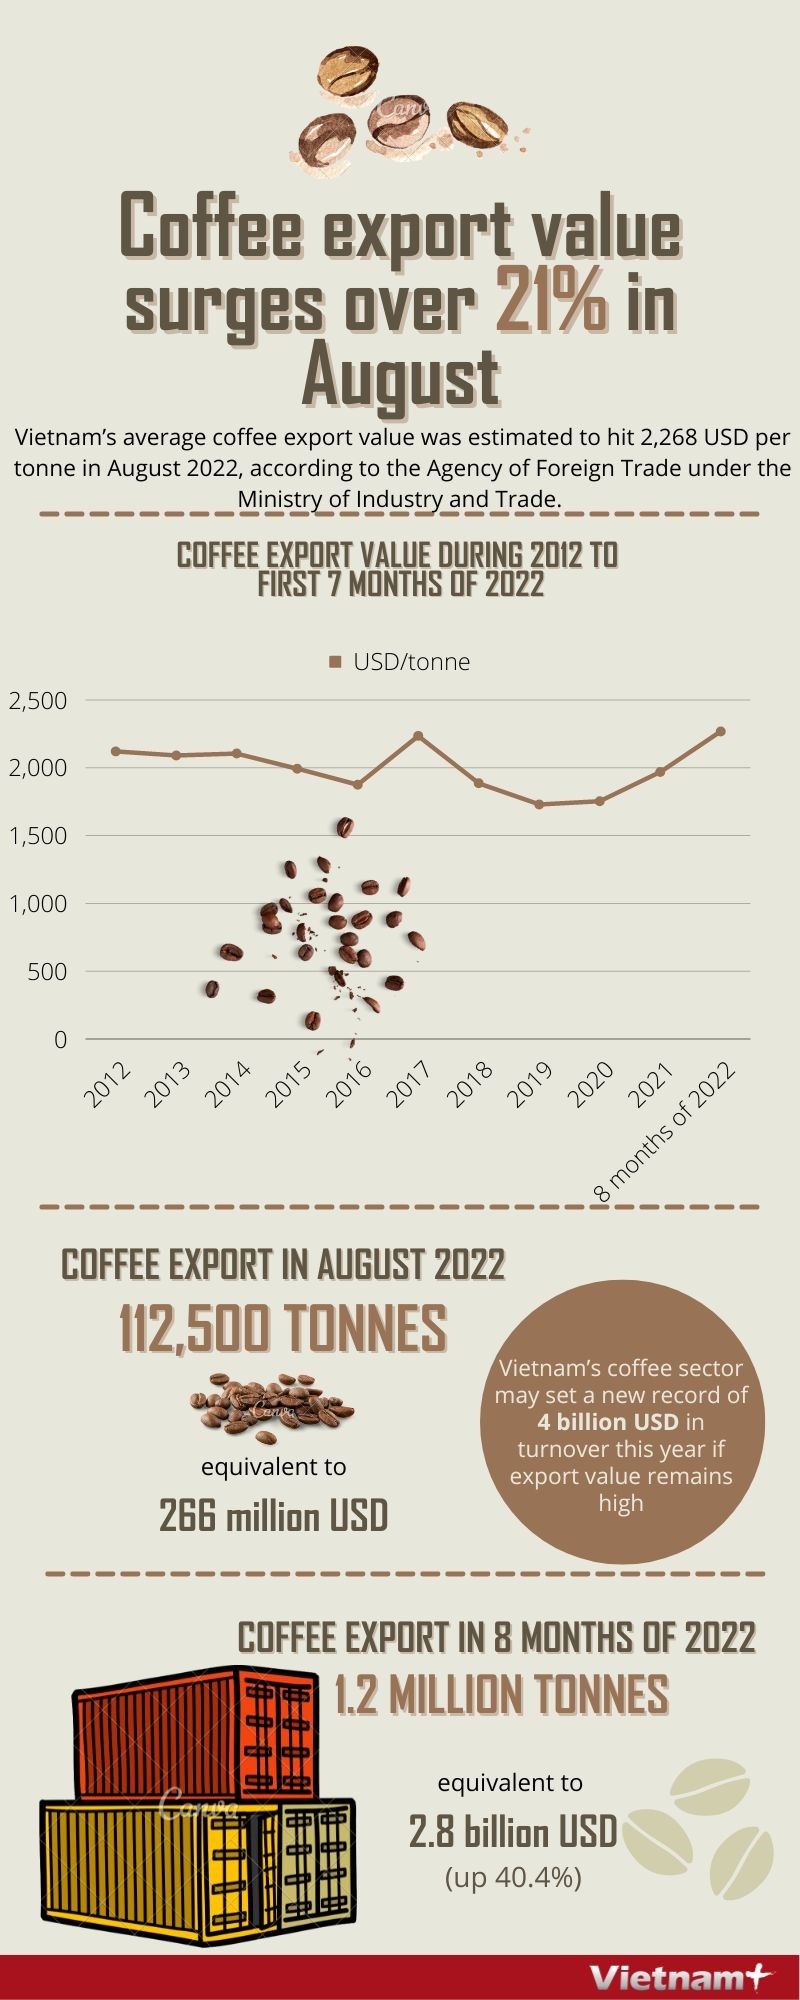 Coffee export value surges over 21% in August hinh anh 1